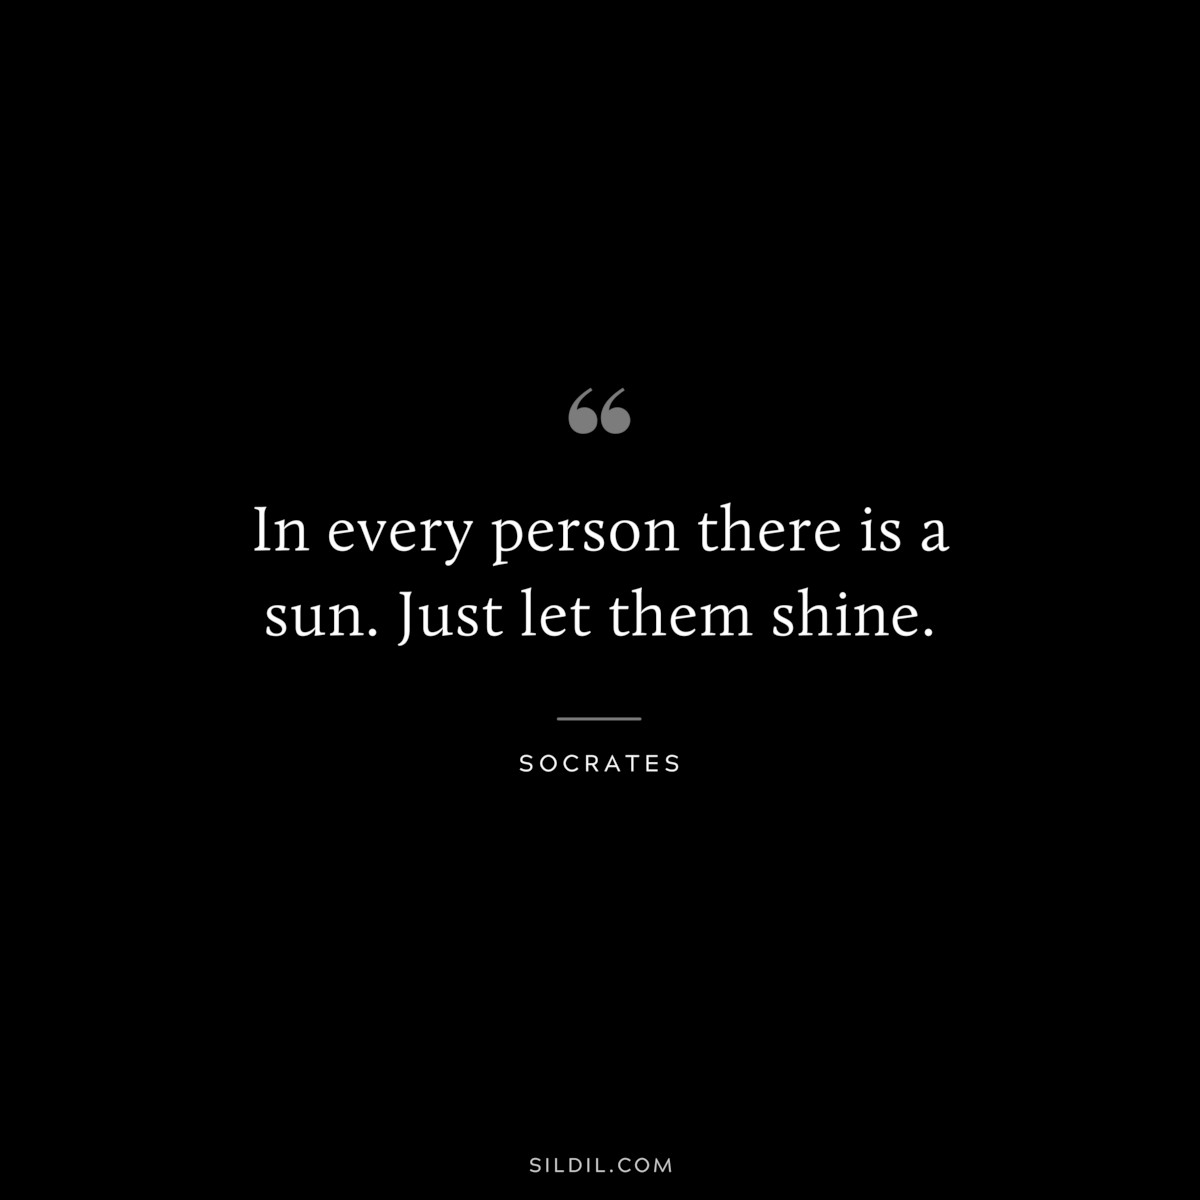 In every person there is a sun. Just let them shine. ― Socrates